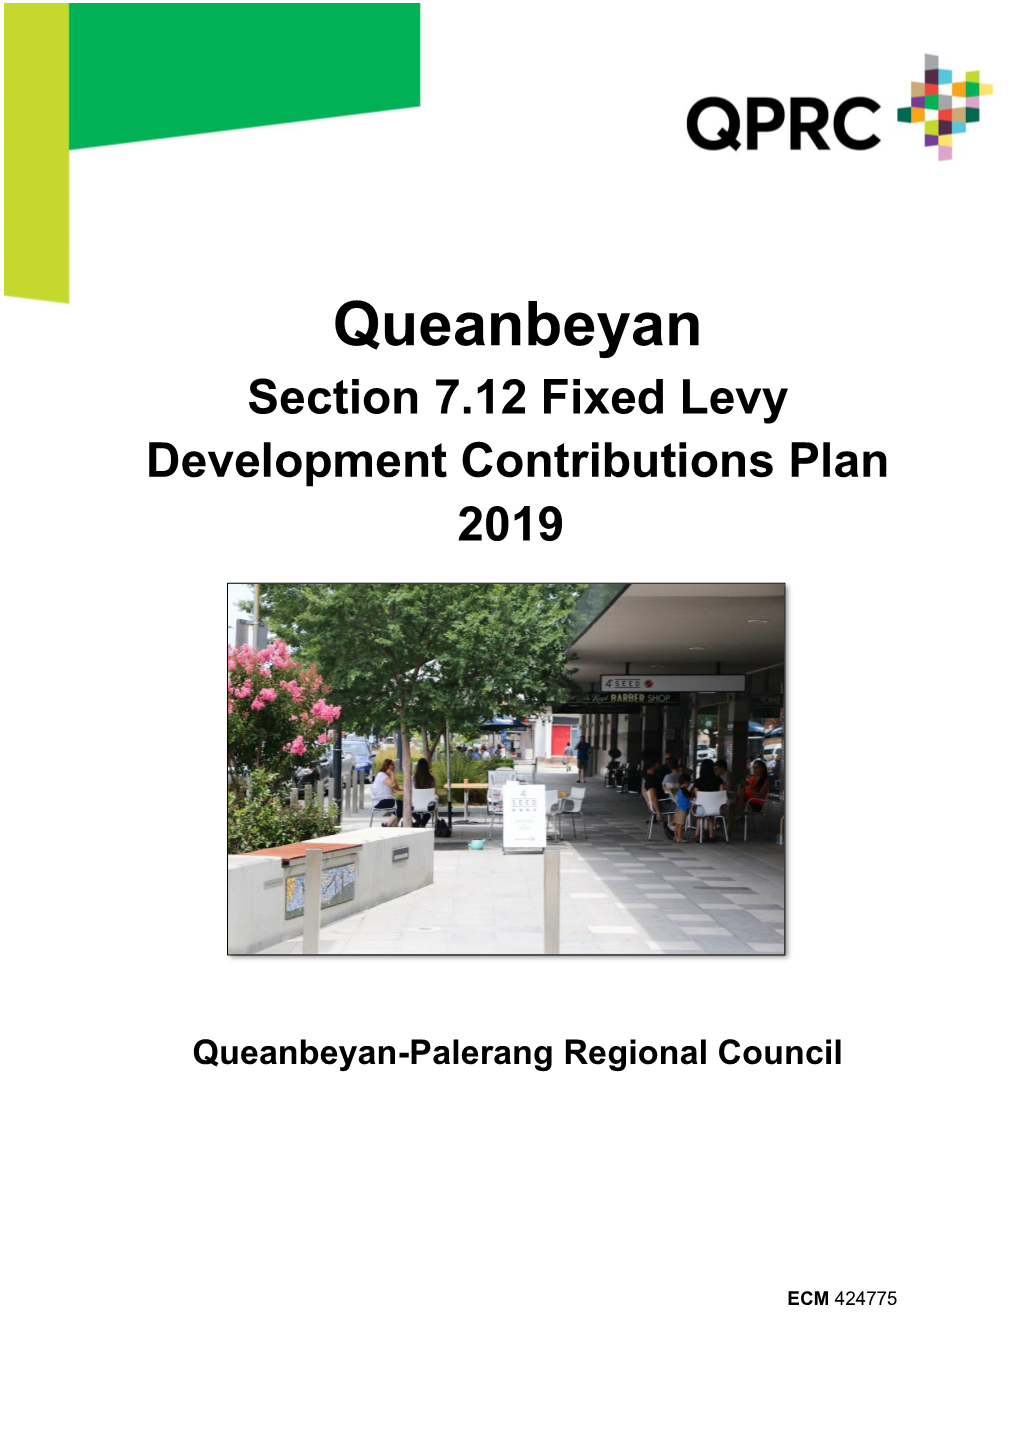 Queanbeyan Section 7.12 Fixed Levy Development Contributions Plan 2019